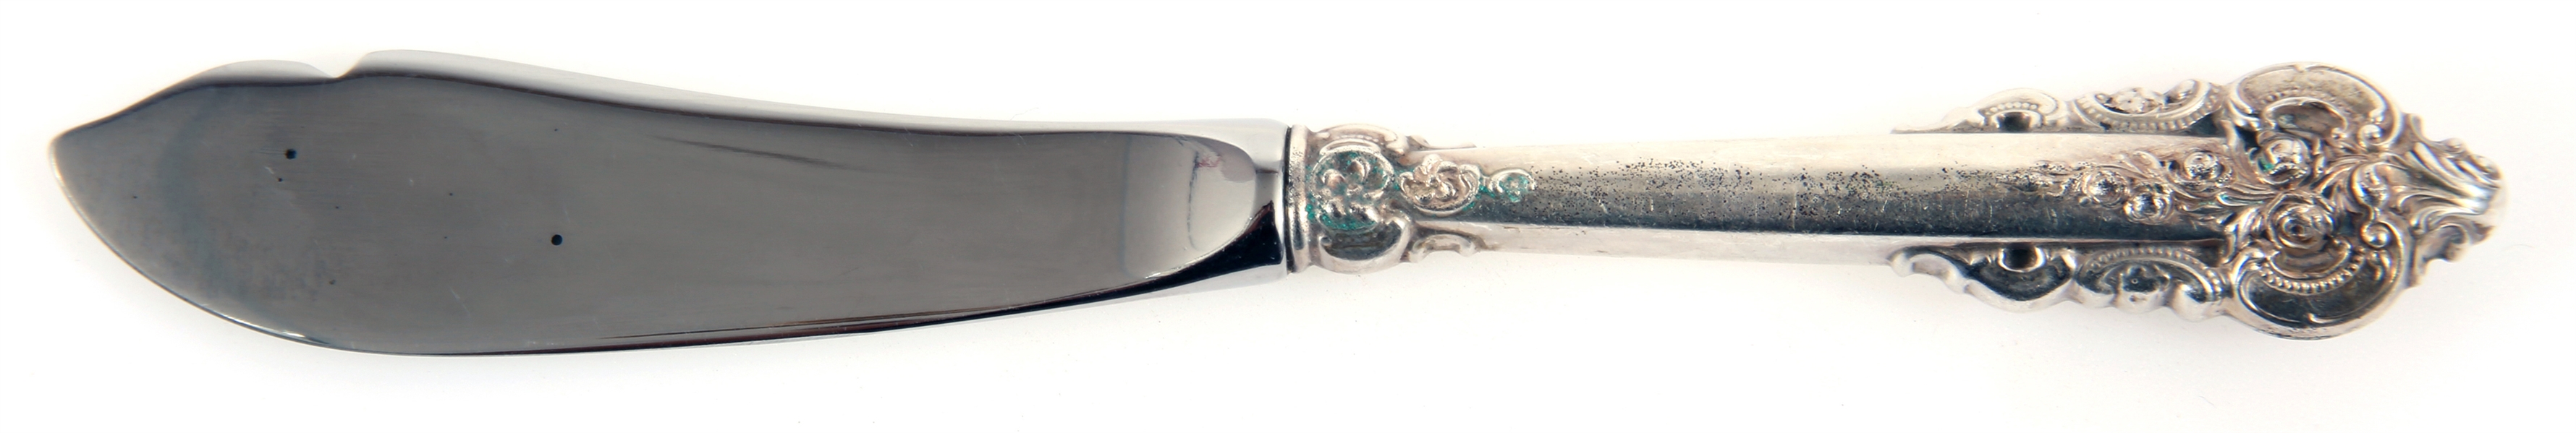 WALLACE STERLING GRANDE BAROQUE MASTER BUTTER KNIFE